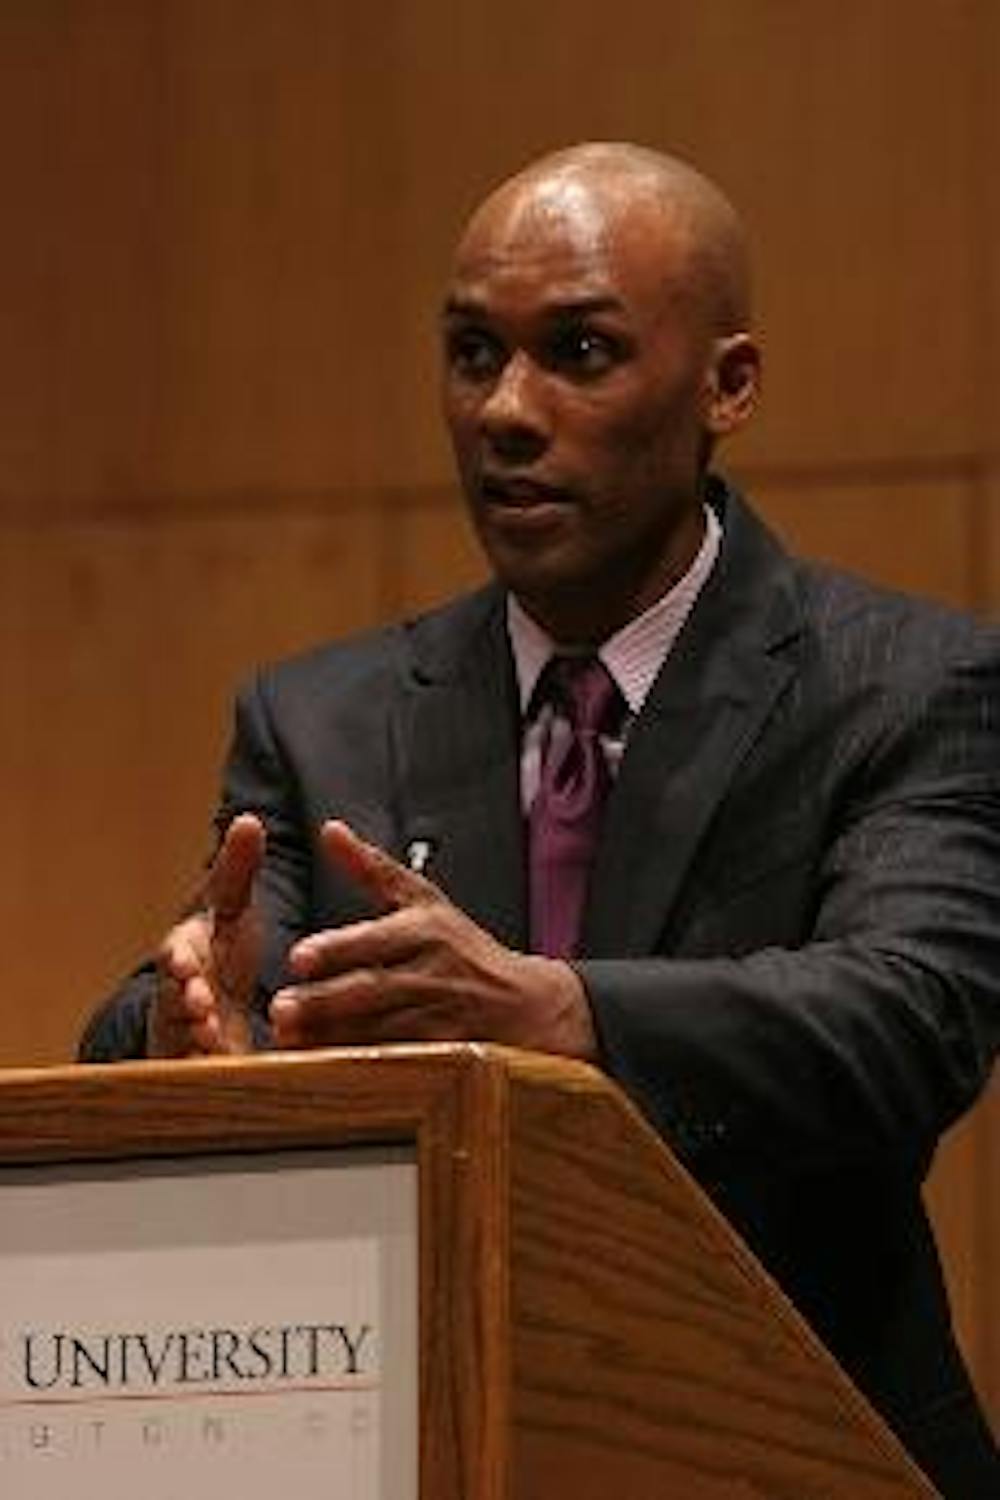 POLITICS AND SEXUALITY - Keith Boykin, former AU professor and best-selling author, speaks on sexuality, experience working in the Clinton administration and the candidates running for president. 